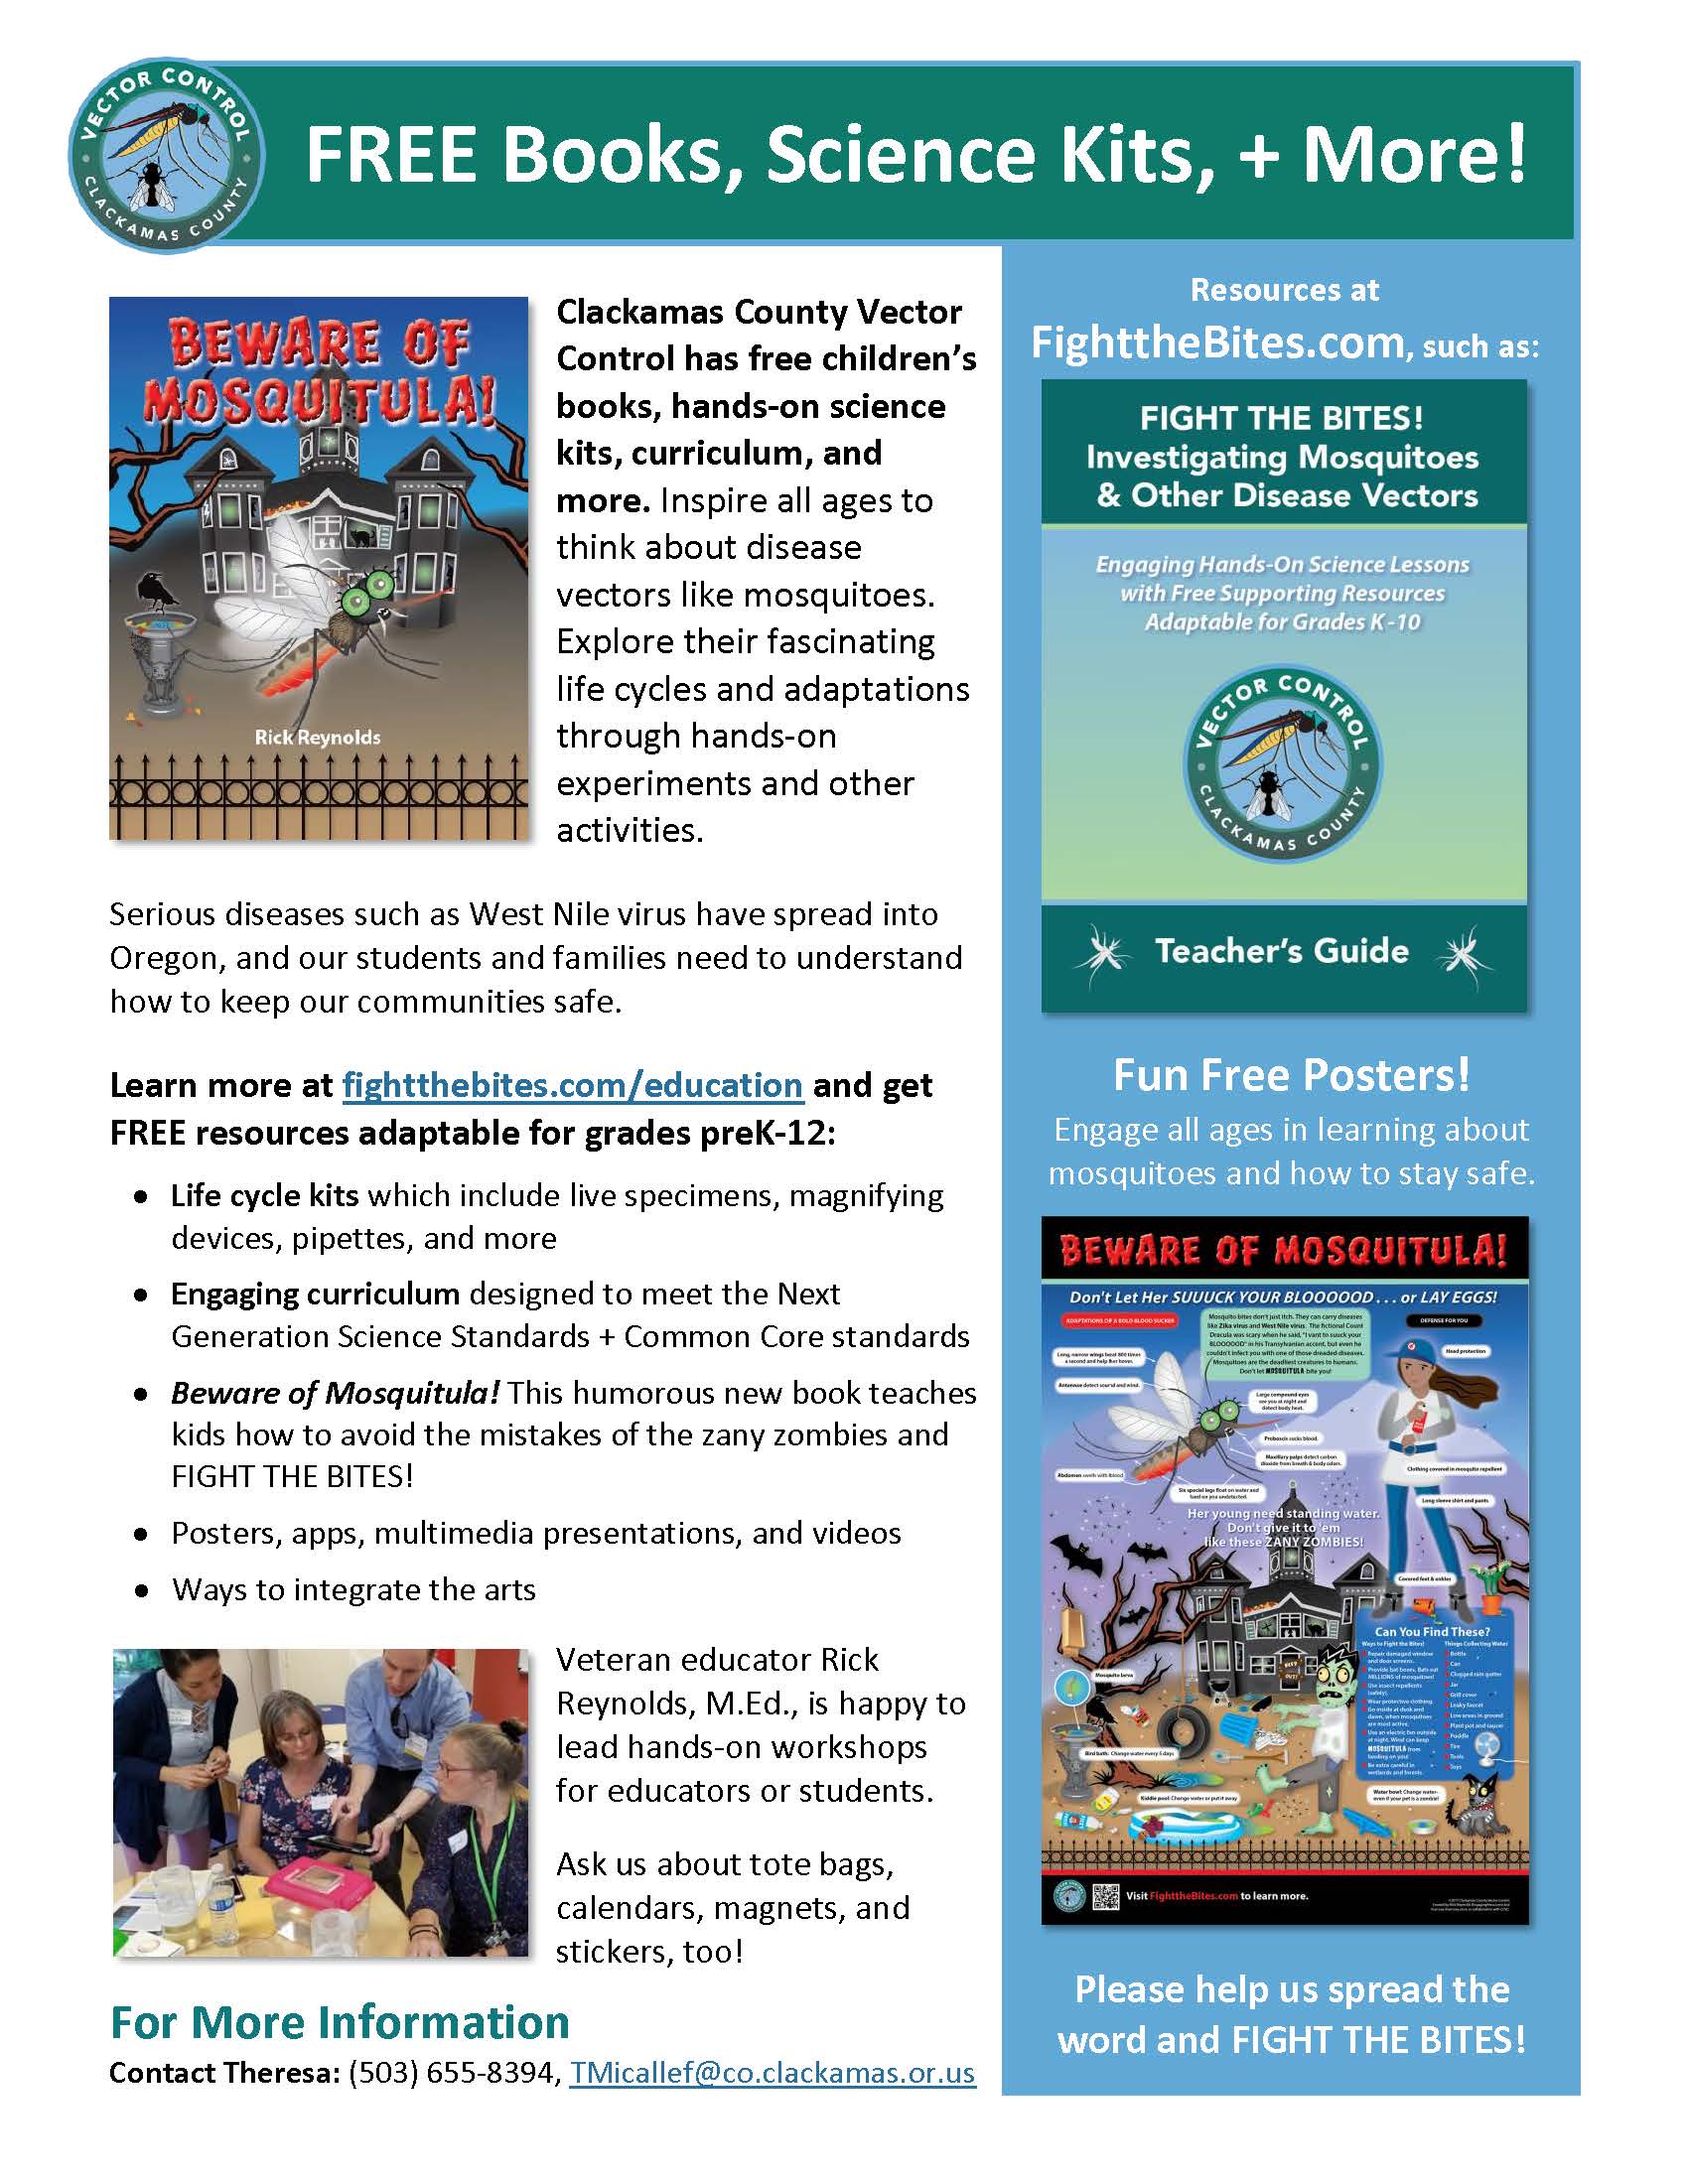 FREE Books, Science Kits, + More! flyer cover